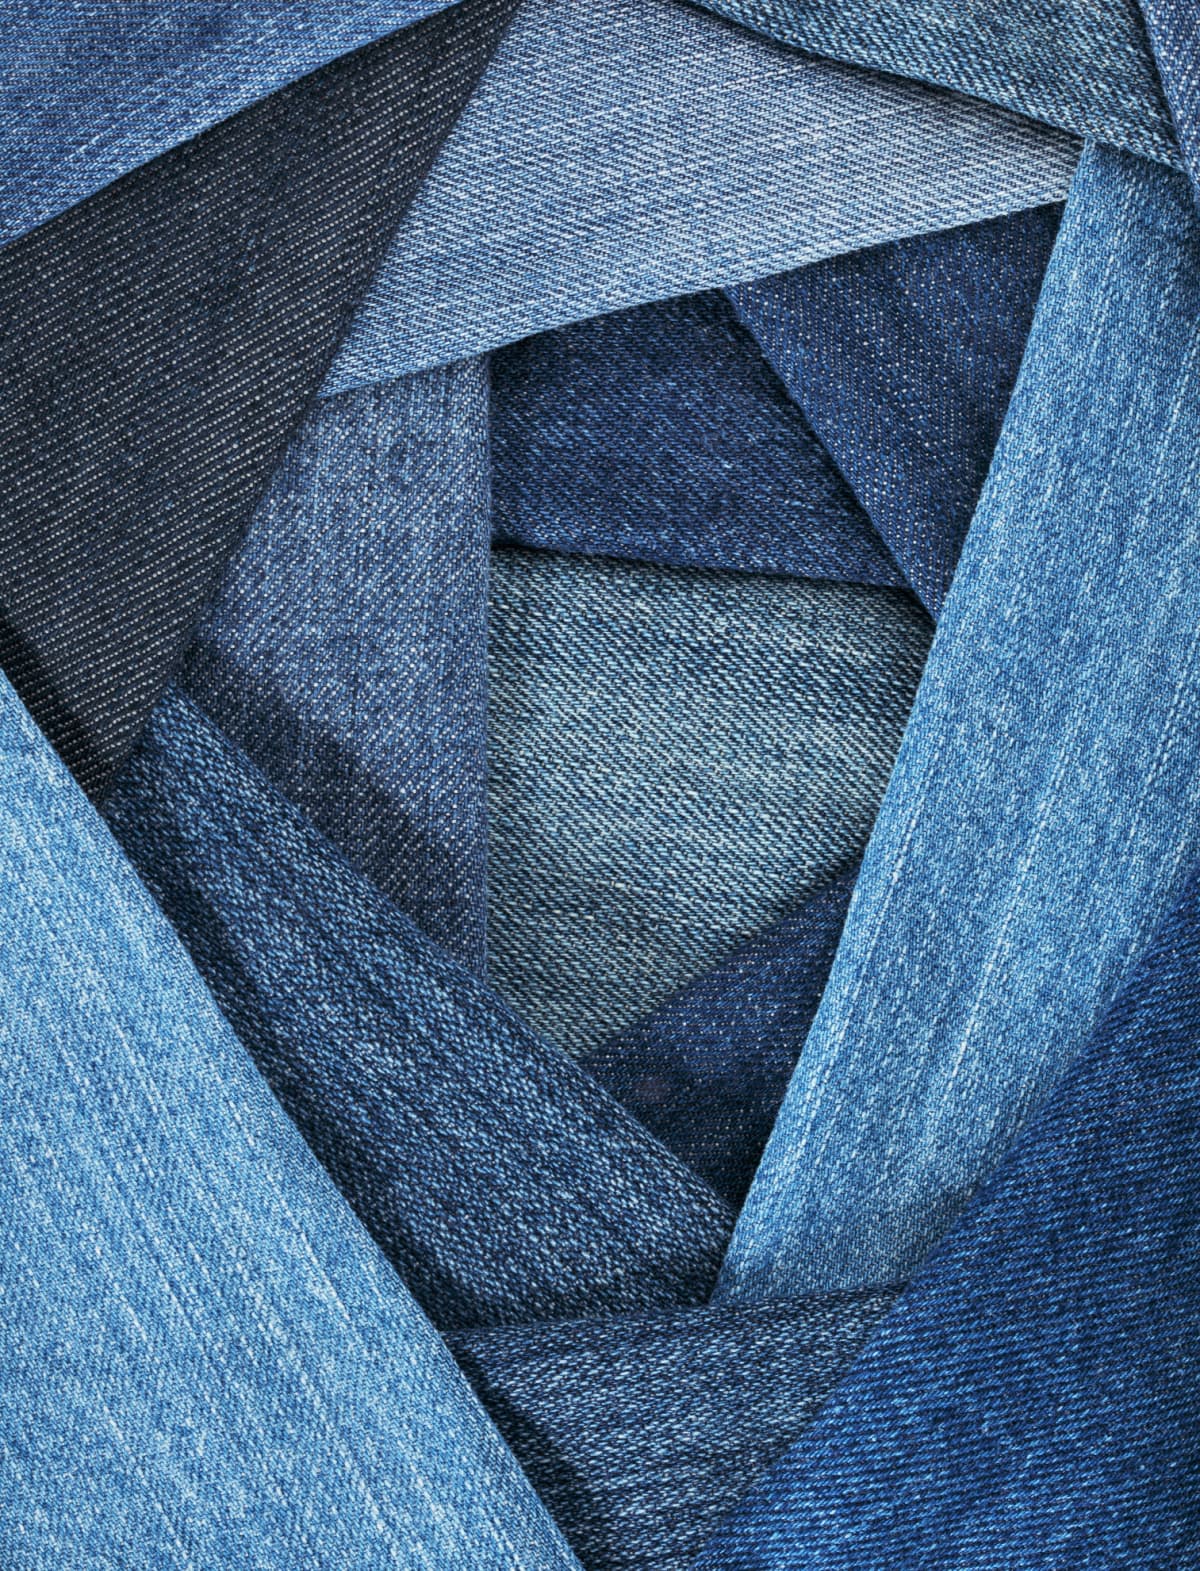 Close up of different colored denims overlapping